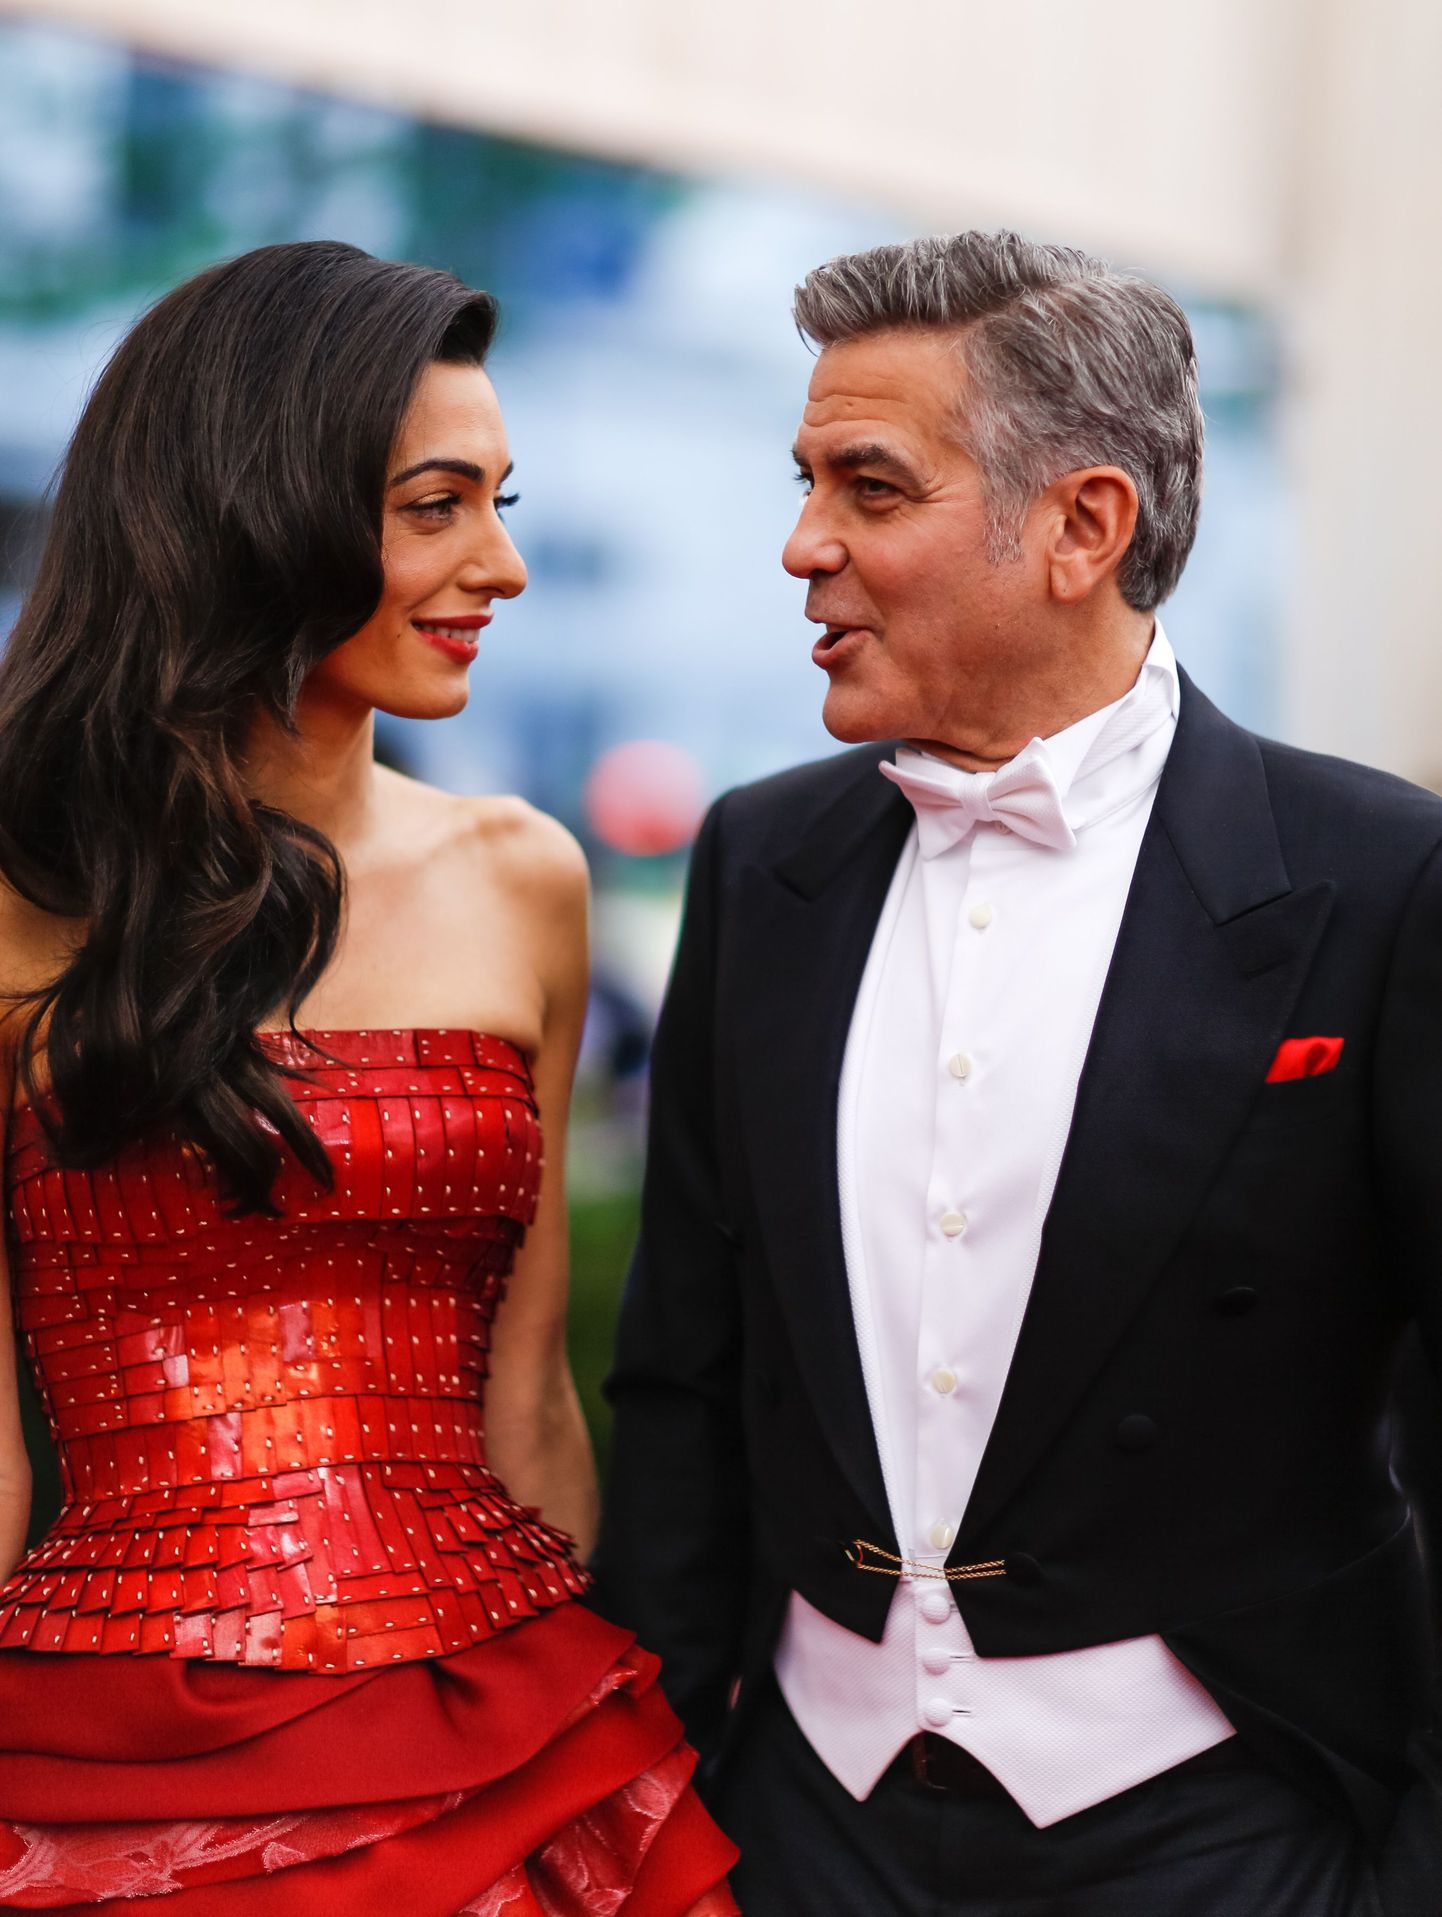 Amal Alamuddin, George Clooney - 5/4/2015 - New York, New York - The Metropolitan Museum of Art's COSTUME INSTITUTE Benefit Celebrating the Opening of China: Through the Looking Glass - Red Carpet Arrivals held at The Metropolitan Museum of Art, New York. (Photo by Julian Mackler/BFA) *** Please Use Credit from Credit Field ***